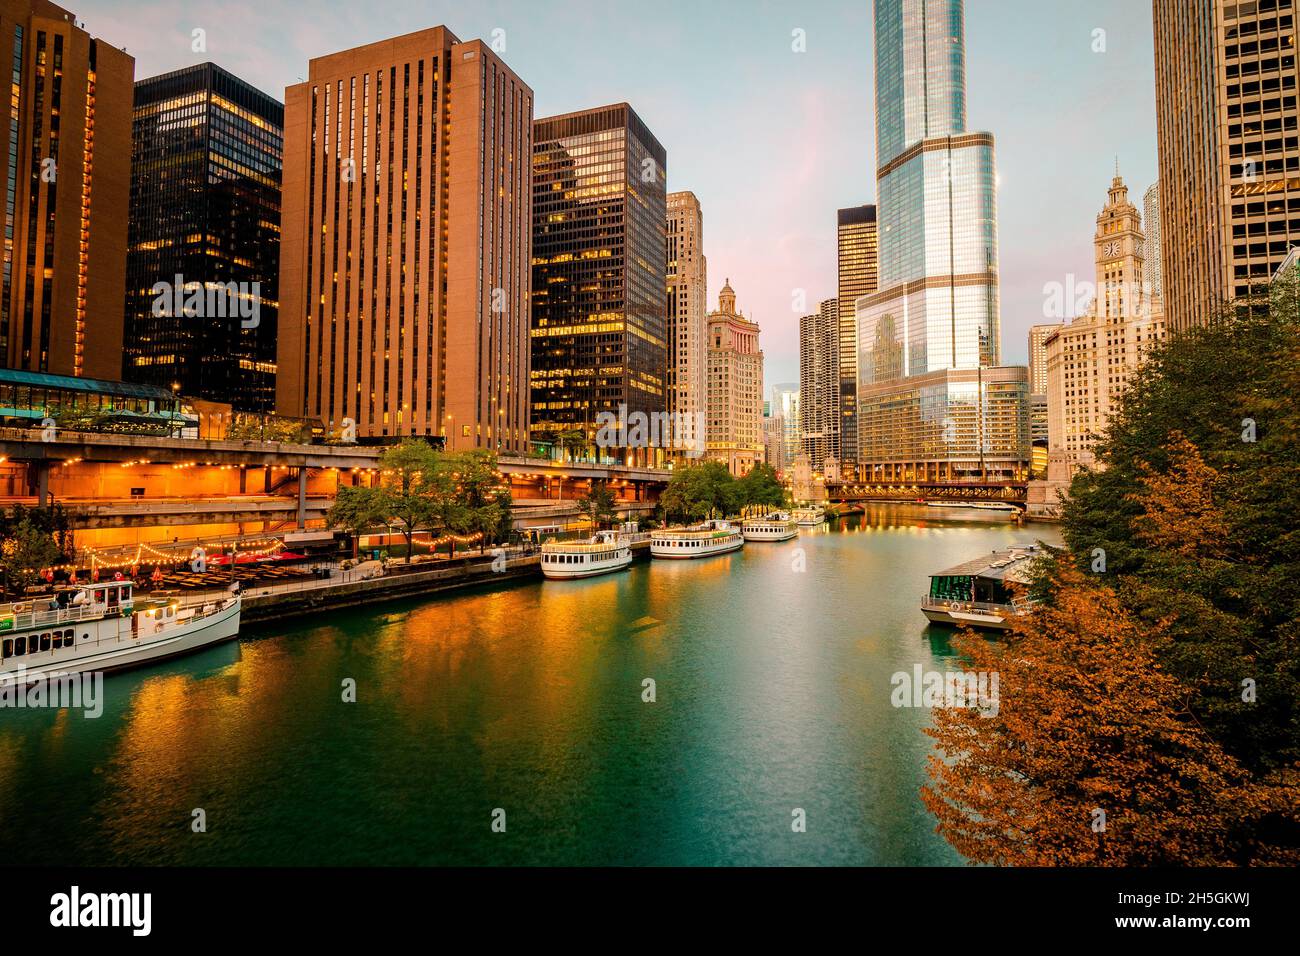 Early morning view of moored tour boats at the main stem of the Chicago River with skyscrapers in the background, Downtown Chicago, IL, USA Stock Photo